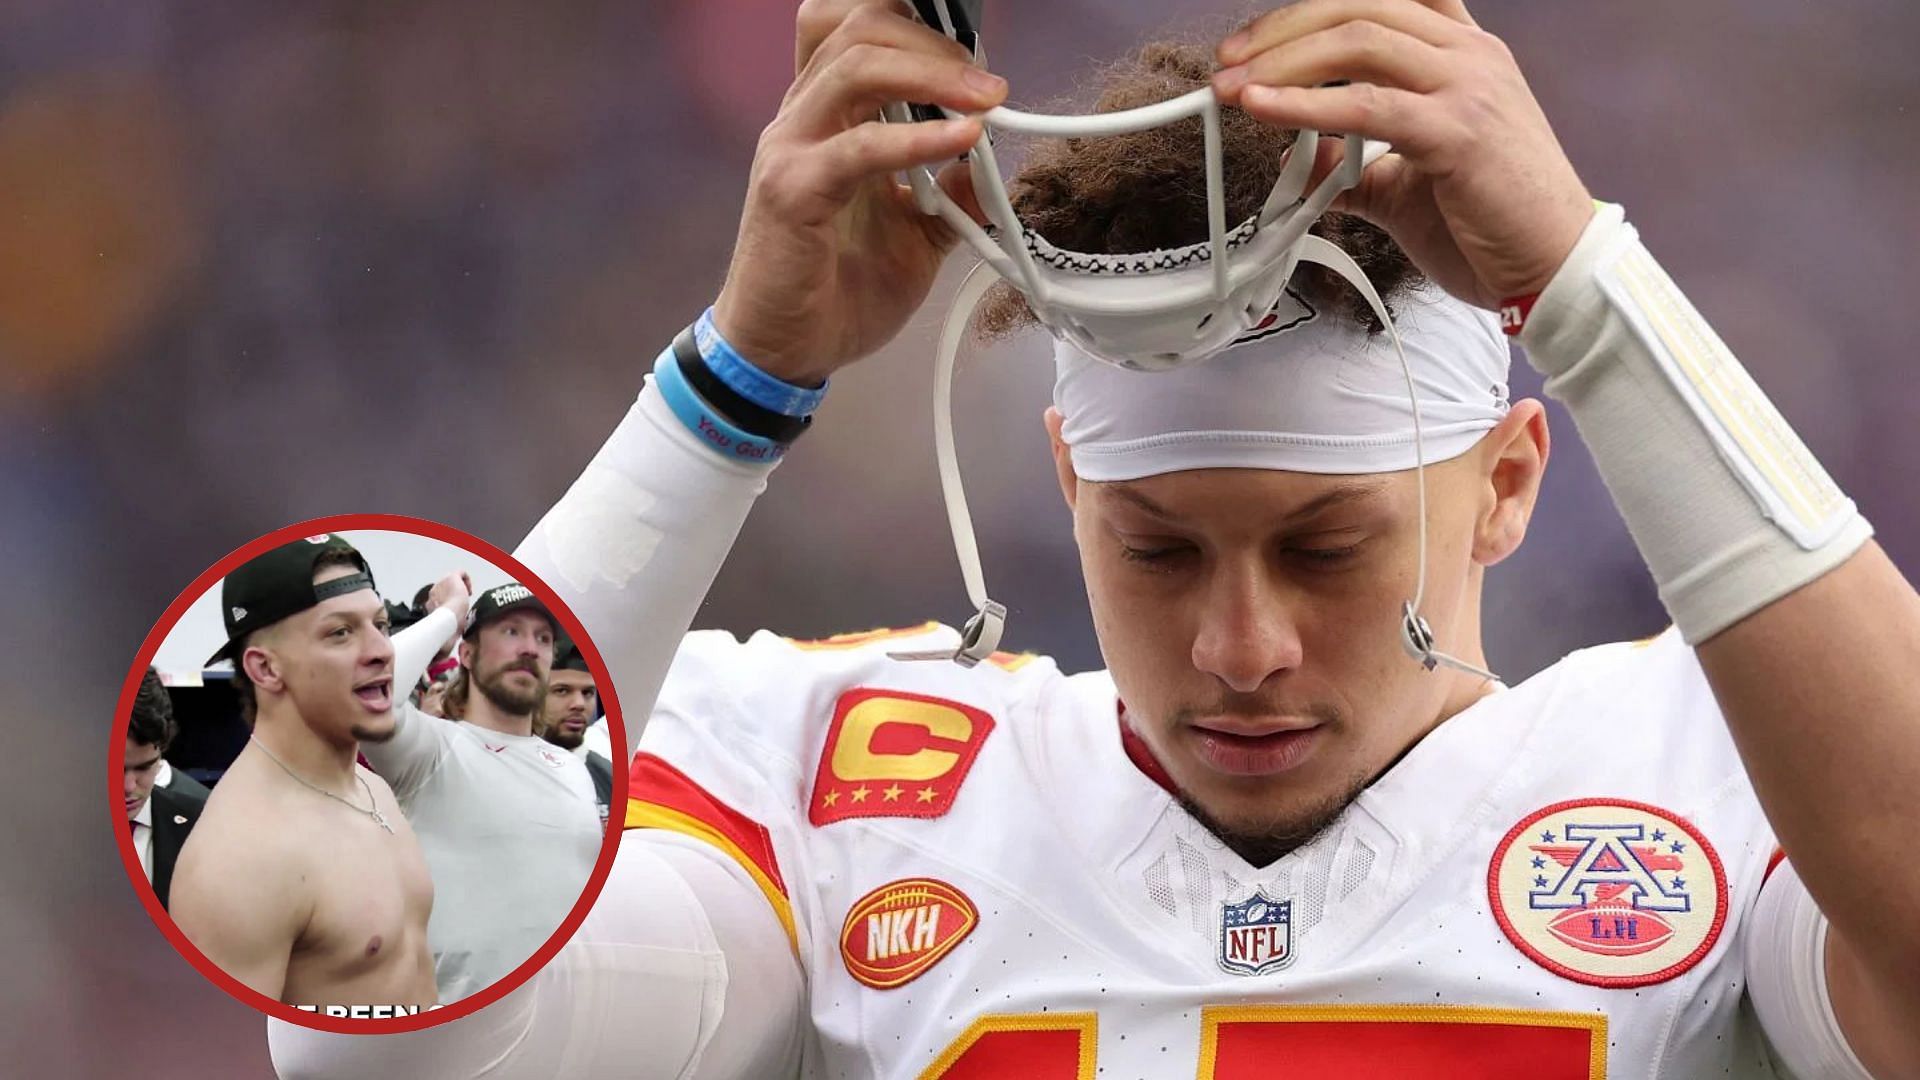 Patrick Mahomes embarrassed as Chiefs QB&rsquo;s shirtless dad-bod picture goes viral